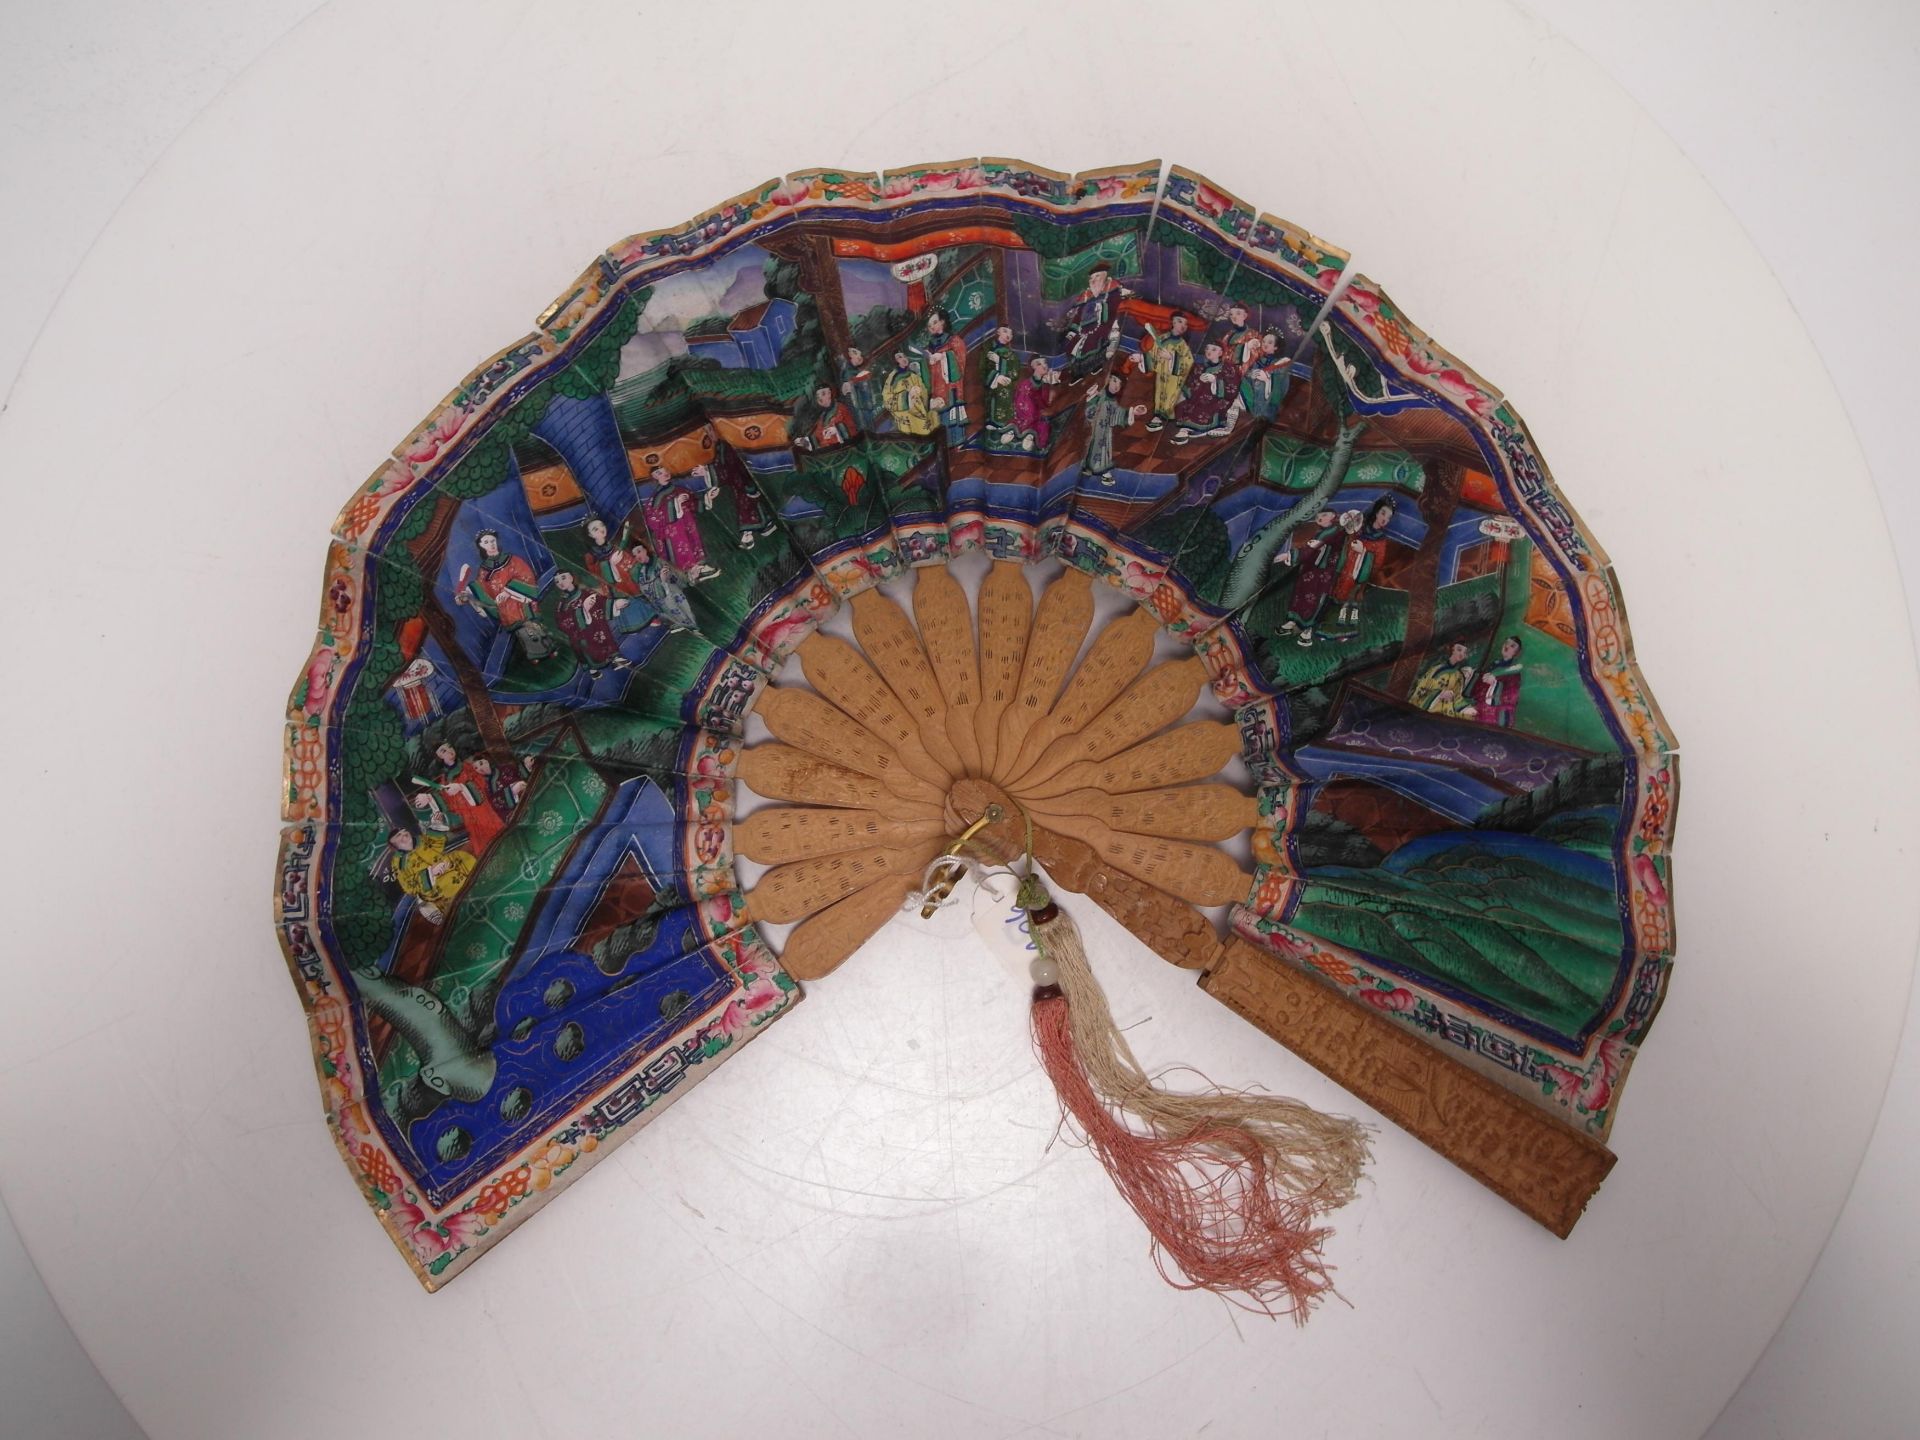 TWO FANS WITH GENRE SCENES, LANDSCAPES AND FLOWERS. Origin: China. Dynasty: Qing dynasty. Date: - Bild 5 aus 11